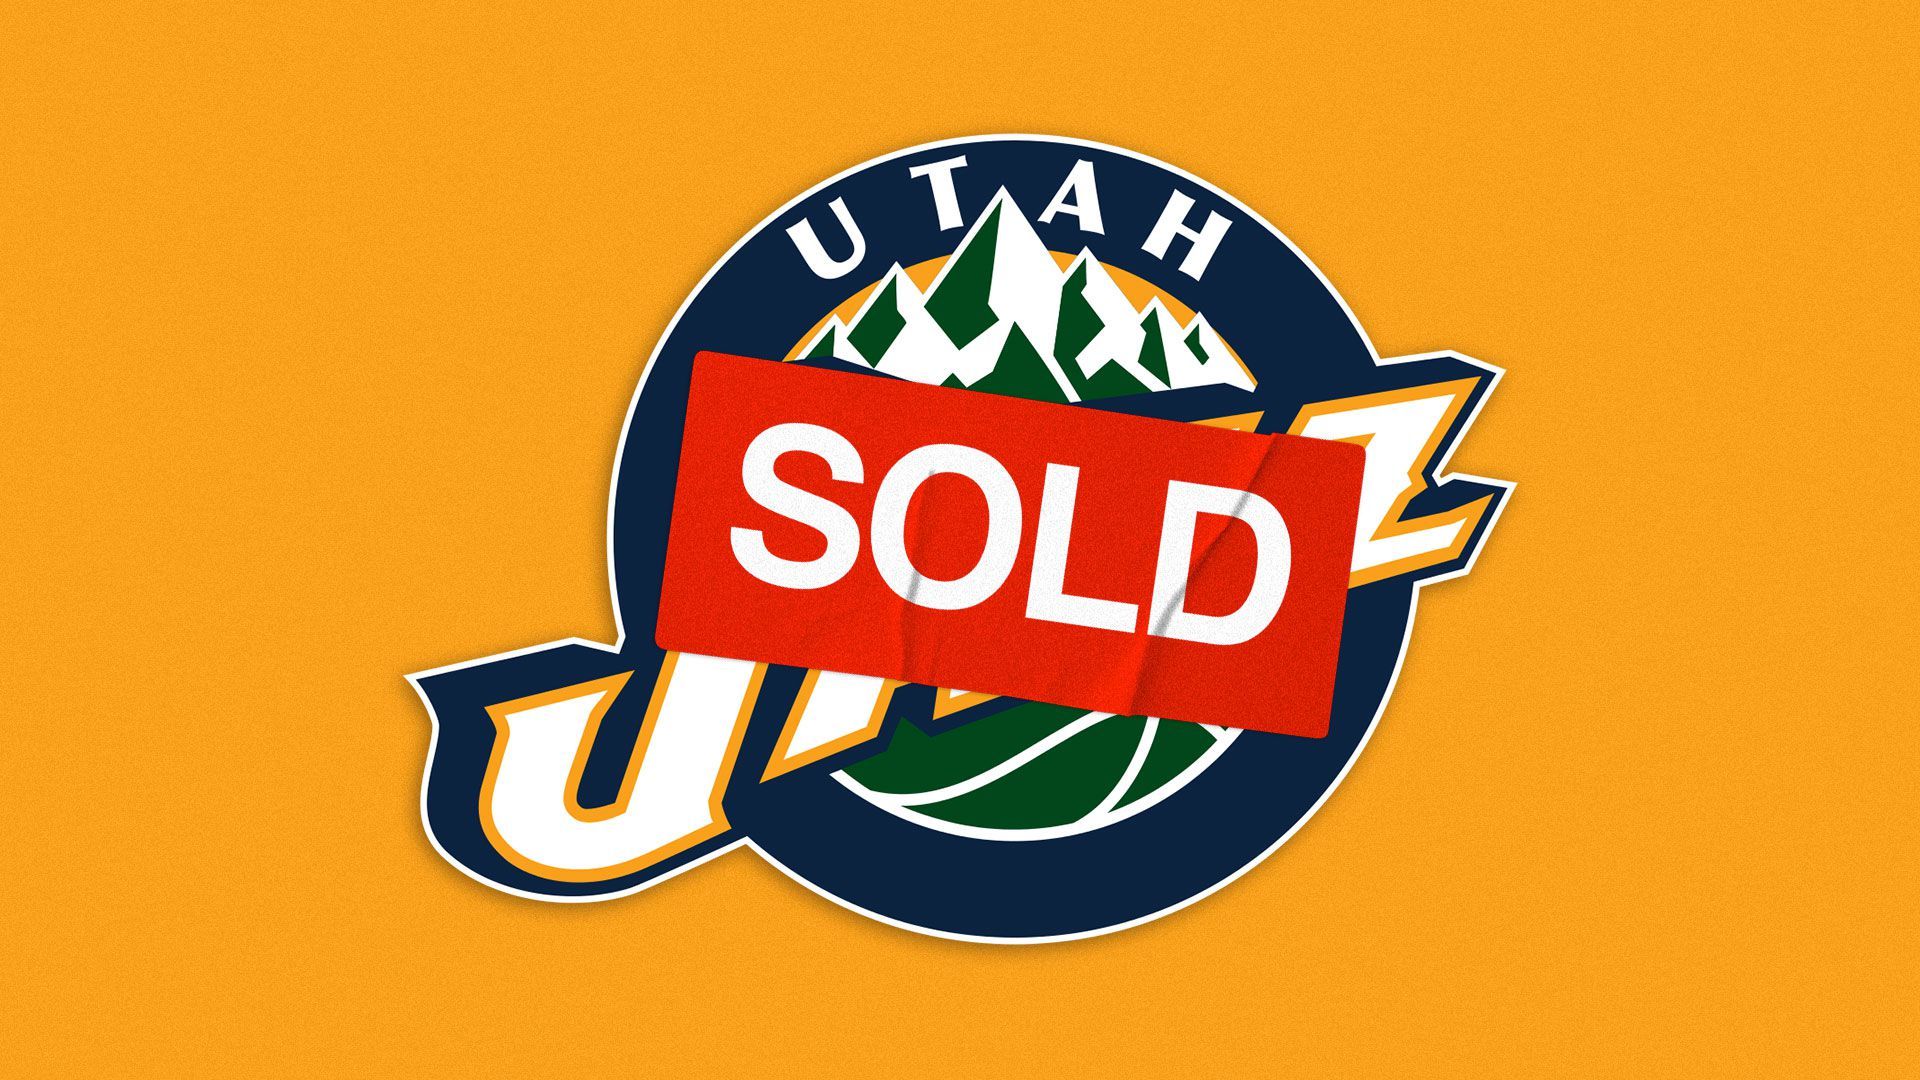 Illustration of Utah Jazz’s logo with a sold sticker on top